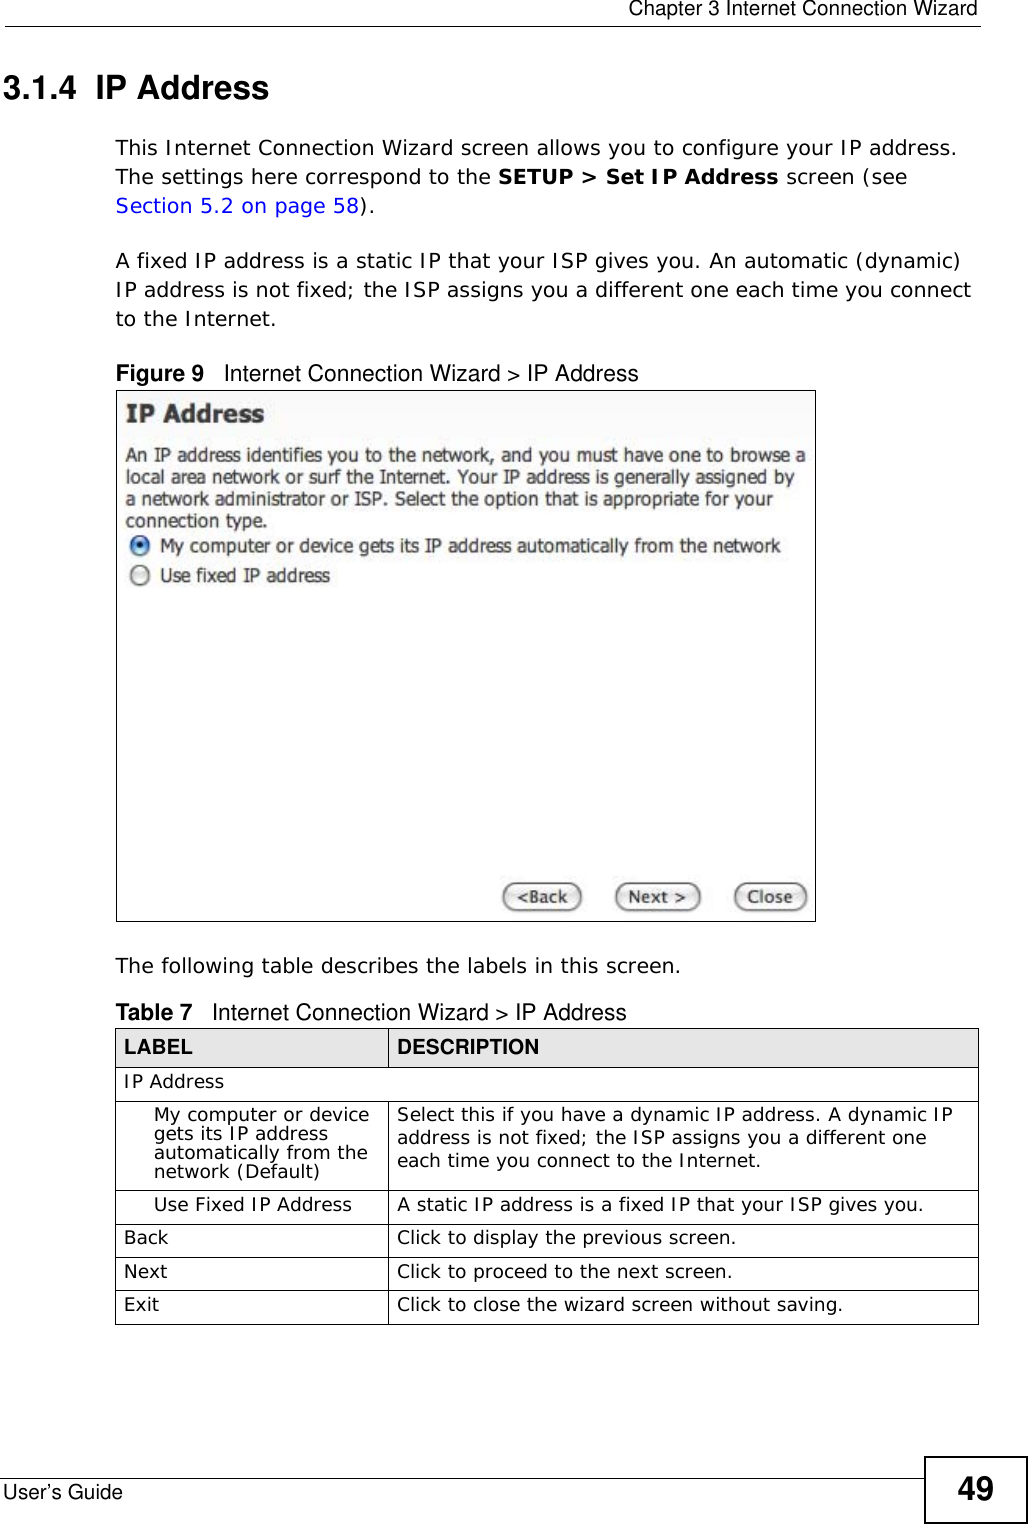  Chapter 3 Internet Connection WizardUser’s Guide 493.1.4  IP AddressThis Internet Connection Wizard screen allows you to configure your IP address. The settings here correspond to the SETUP &gt; Set IP Address screen (see Section 5.2 on page 58).A fixed IP address is a static IP that your ISP gives you. An automatic (dynamic) IP address is not fixed; the ISP assigns you a different one each time you connect to the Internet.Figure 9   Internet Connection Wizard &gt; IP AddressThe following table describes the labels in this screen.Table 7   Internet Connection Wizard &gt; IP AddressLABEL DESCRIPTIONIP AddressMy computer or device gets its IP address automatically from the network (Default)Select this if you have a dynamic IP address. A dynamic IP address is not fixed; the ISP assigns you a different one each time you connect to the Internet.Use Fixed IP Address A static IP address is a fixed IP that your ISP gives you.Back Click to display the previous screen.Next Click to proceed to the next screen.Exit Click to close the wizard screen without saving.